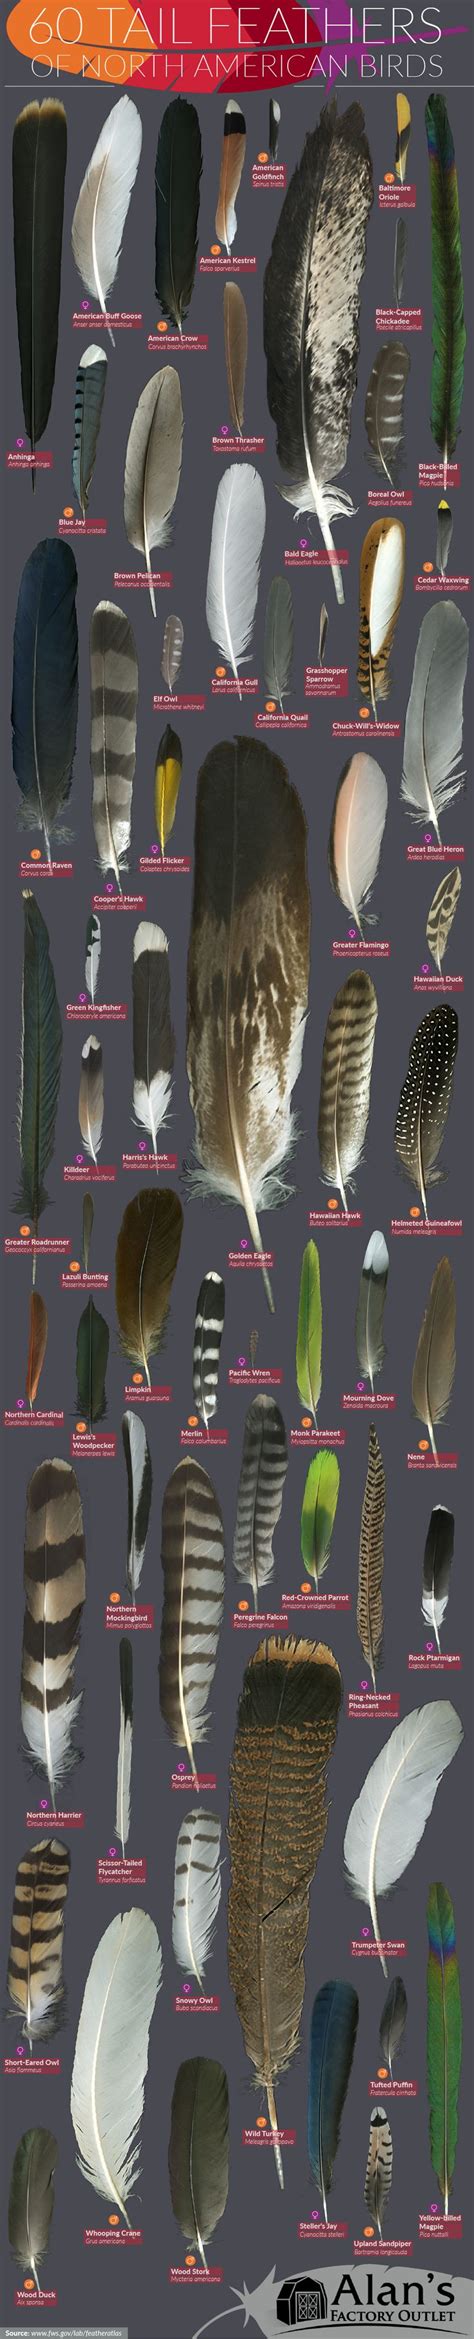 Master Identification Chart Of 60 North American Birds’ Feathers Infographic Feather